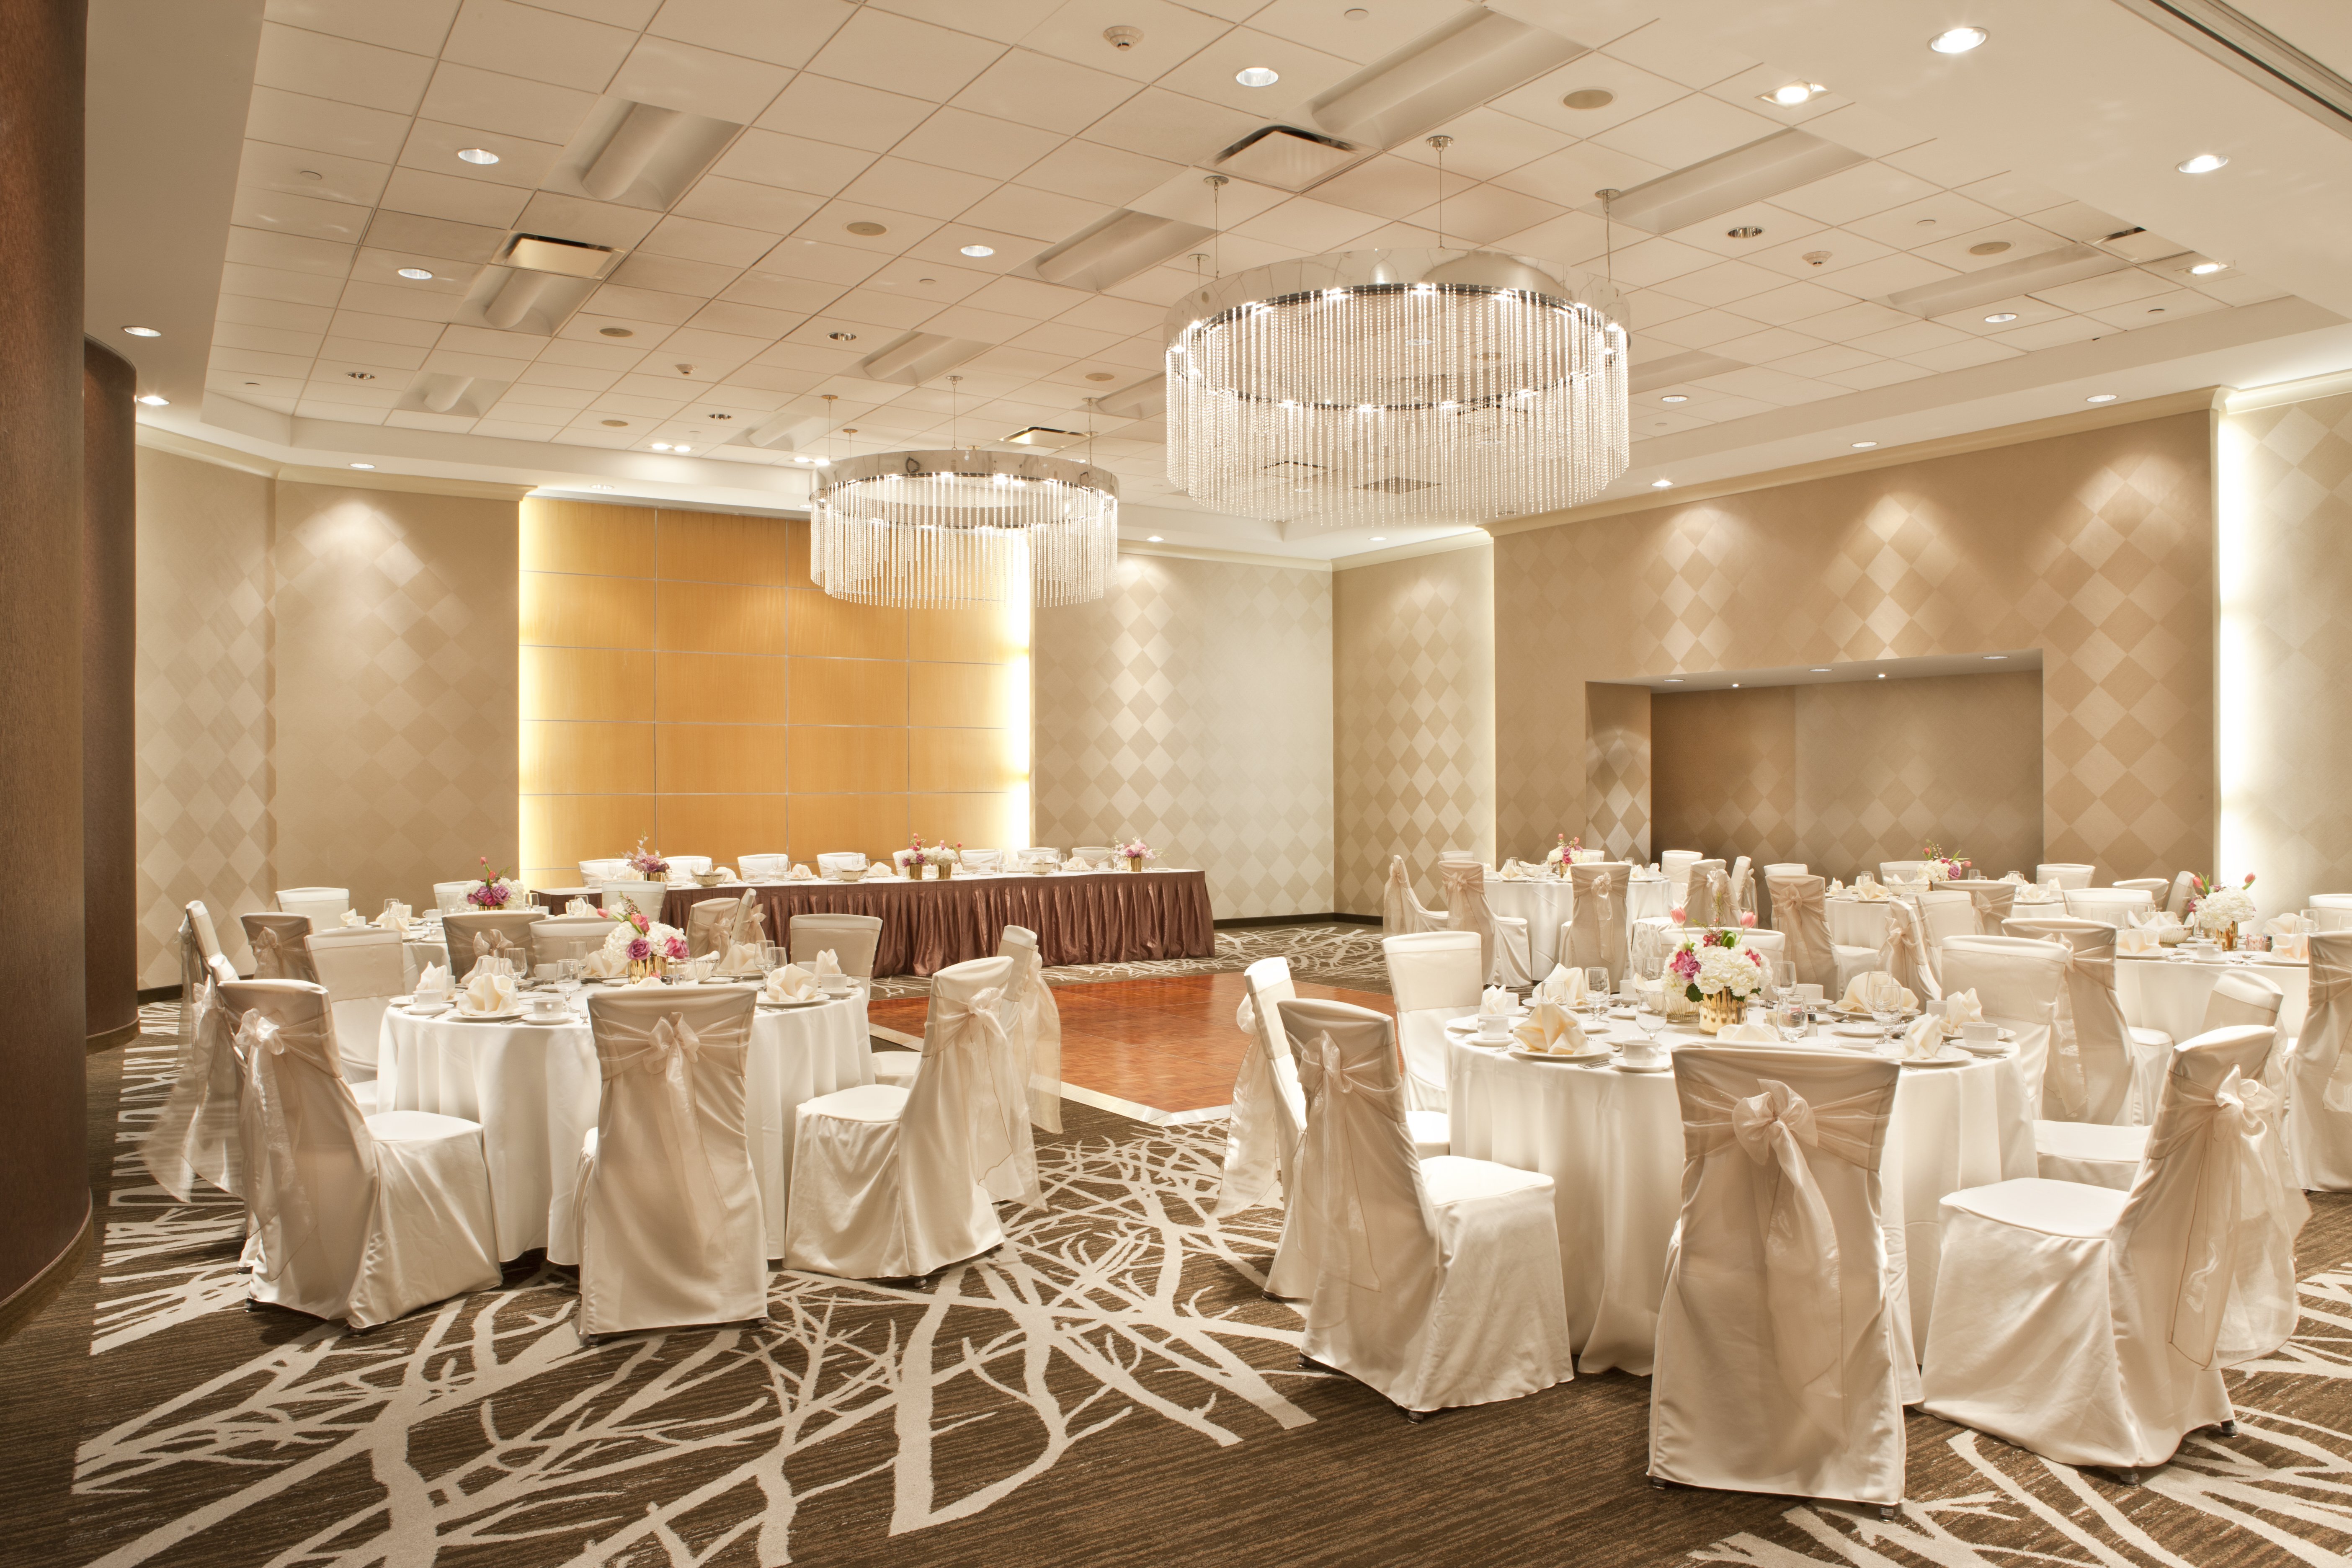 Perfect spaces for weddings, receptions, and other functions.